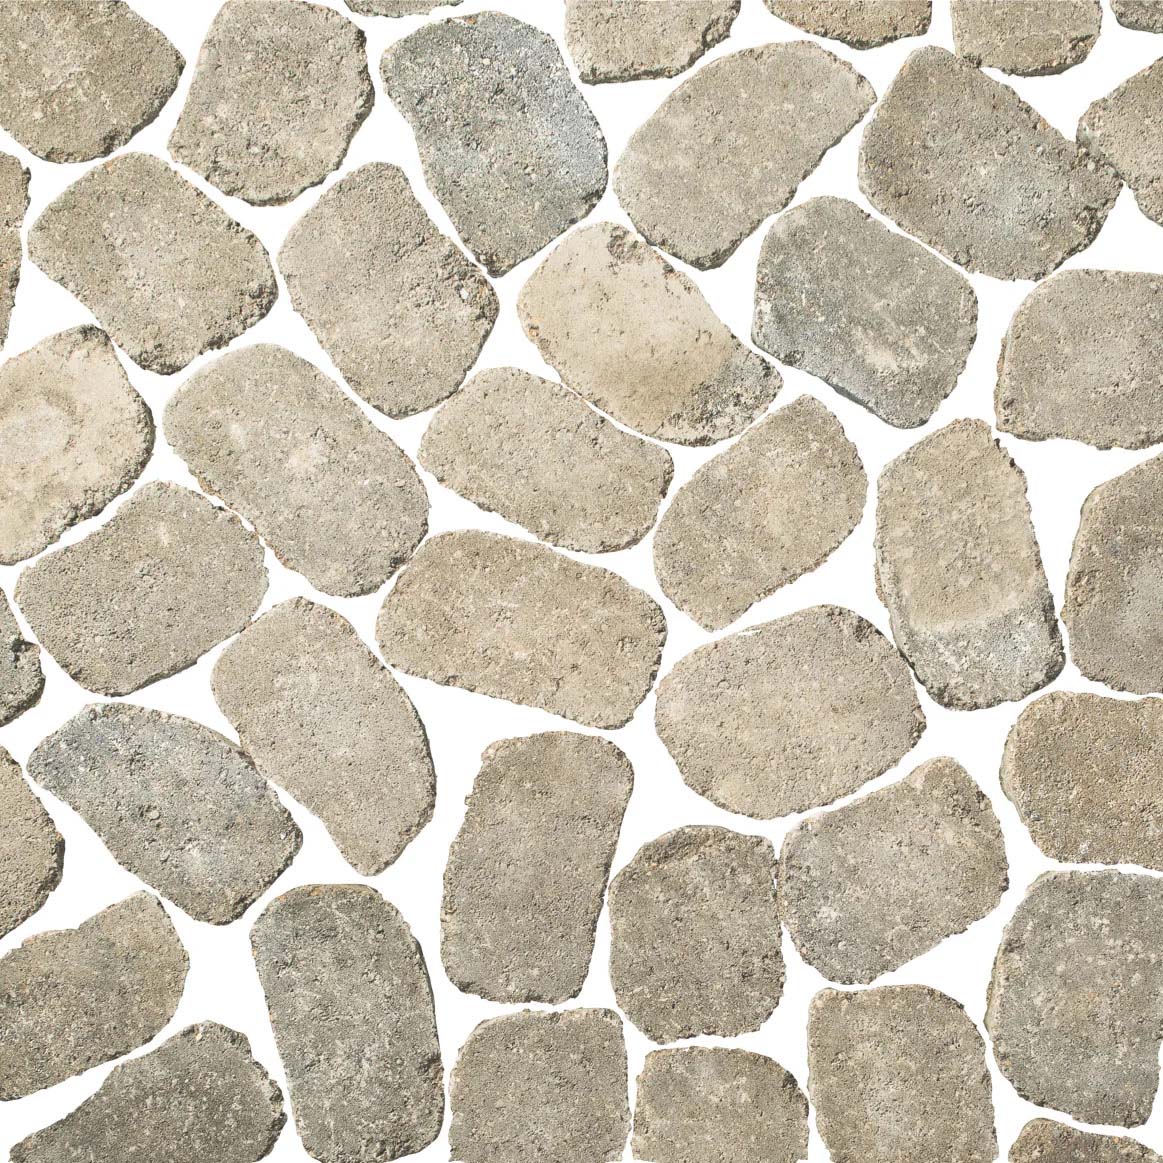 Permeable EnduraColor paver with a simple shape and smooth surface.